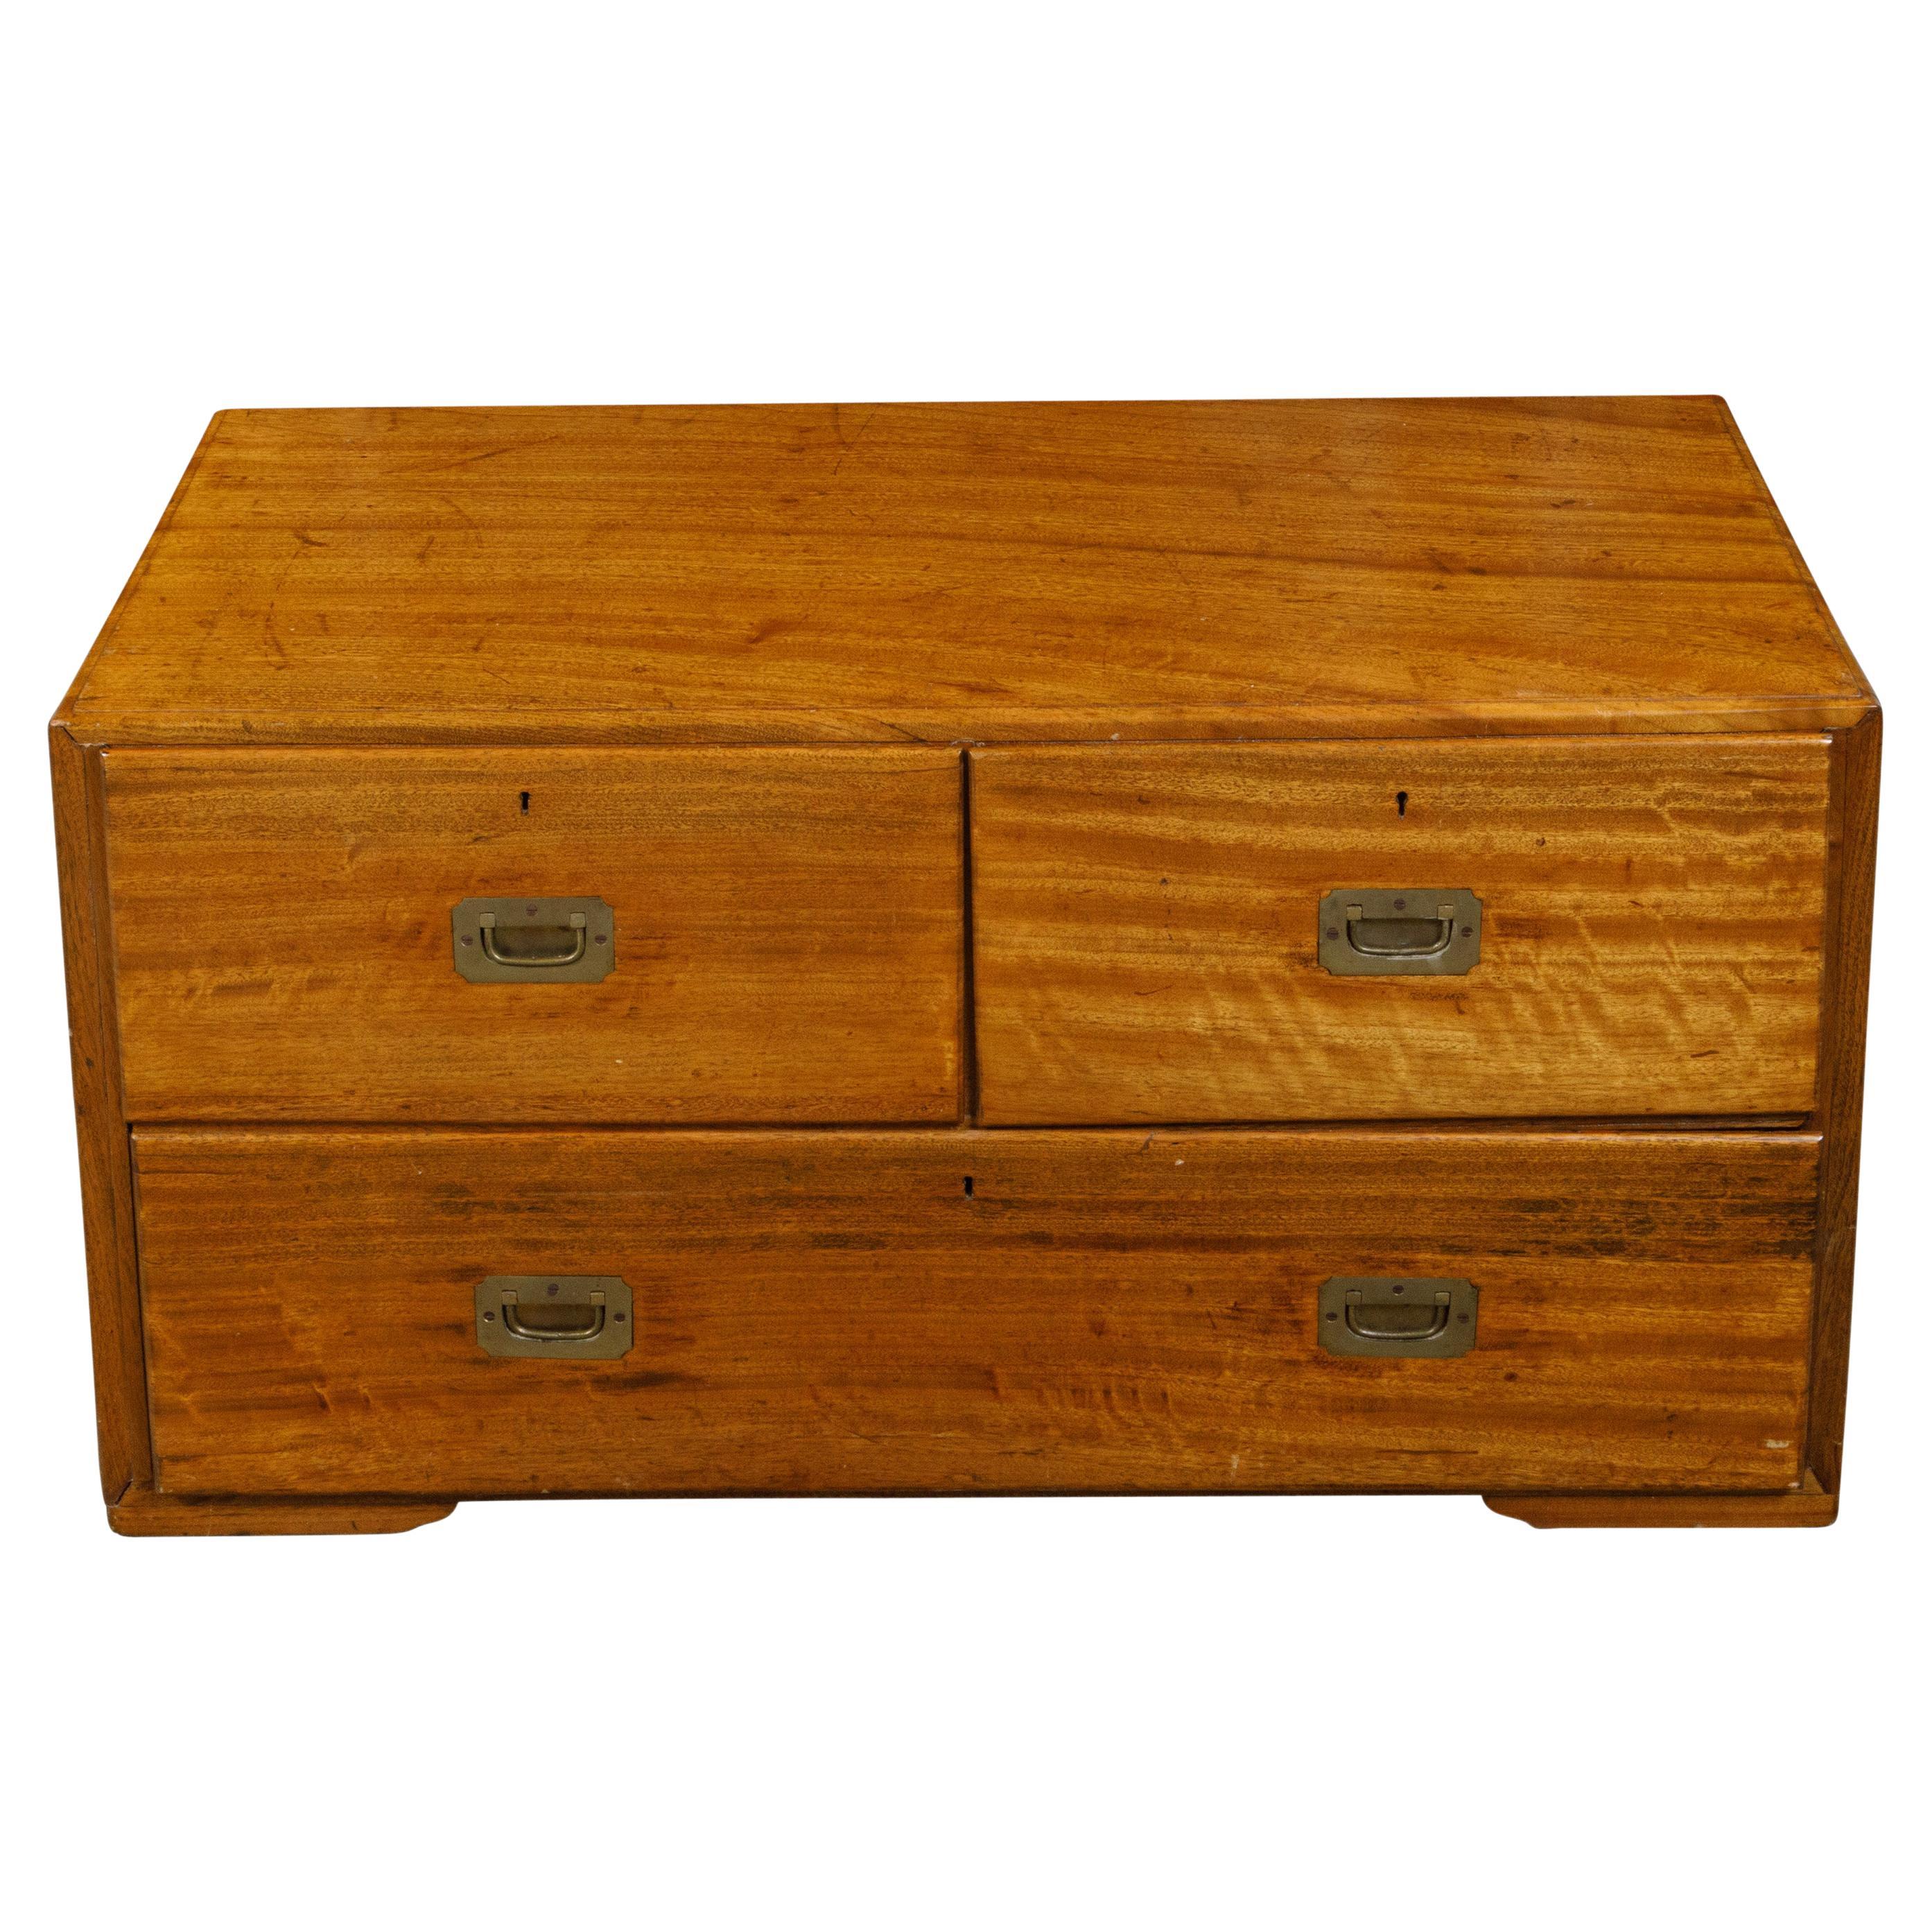 English Campaign 19th Century Camphor Wood Low Chest with Inset Brass Hardware